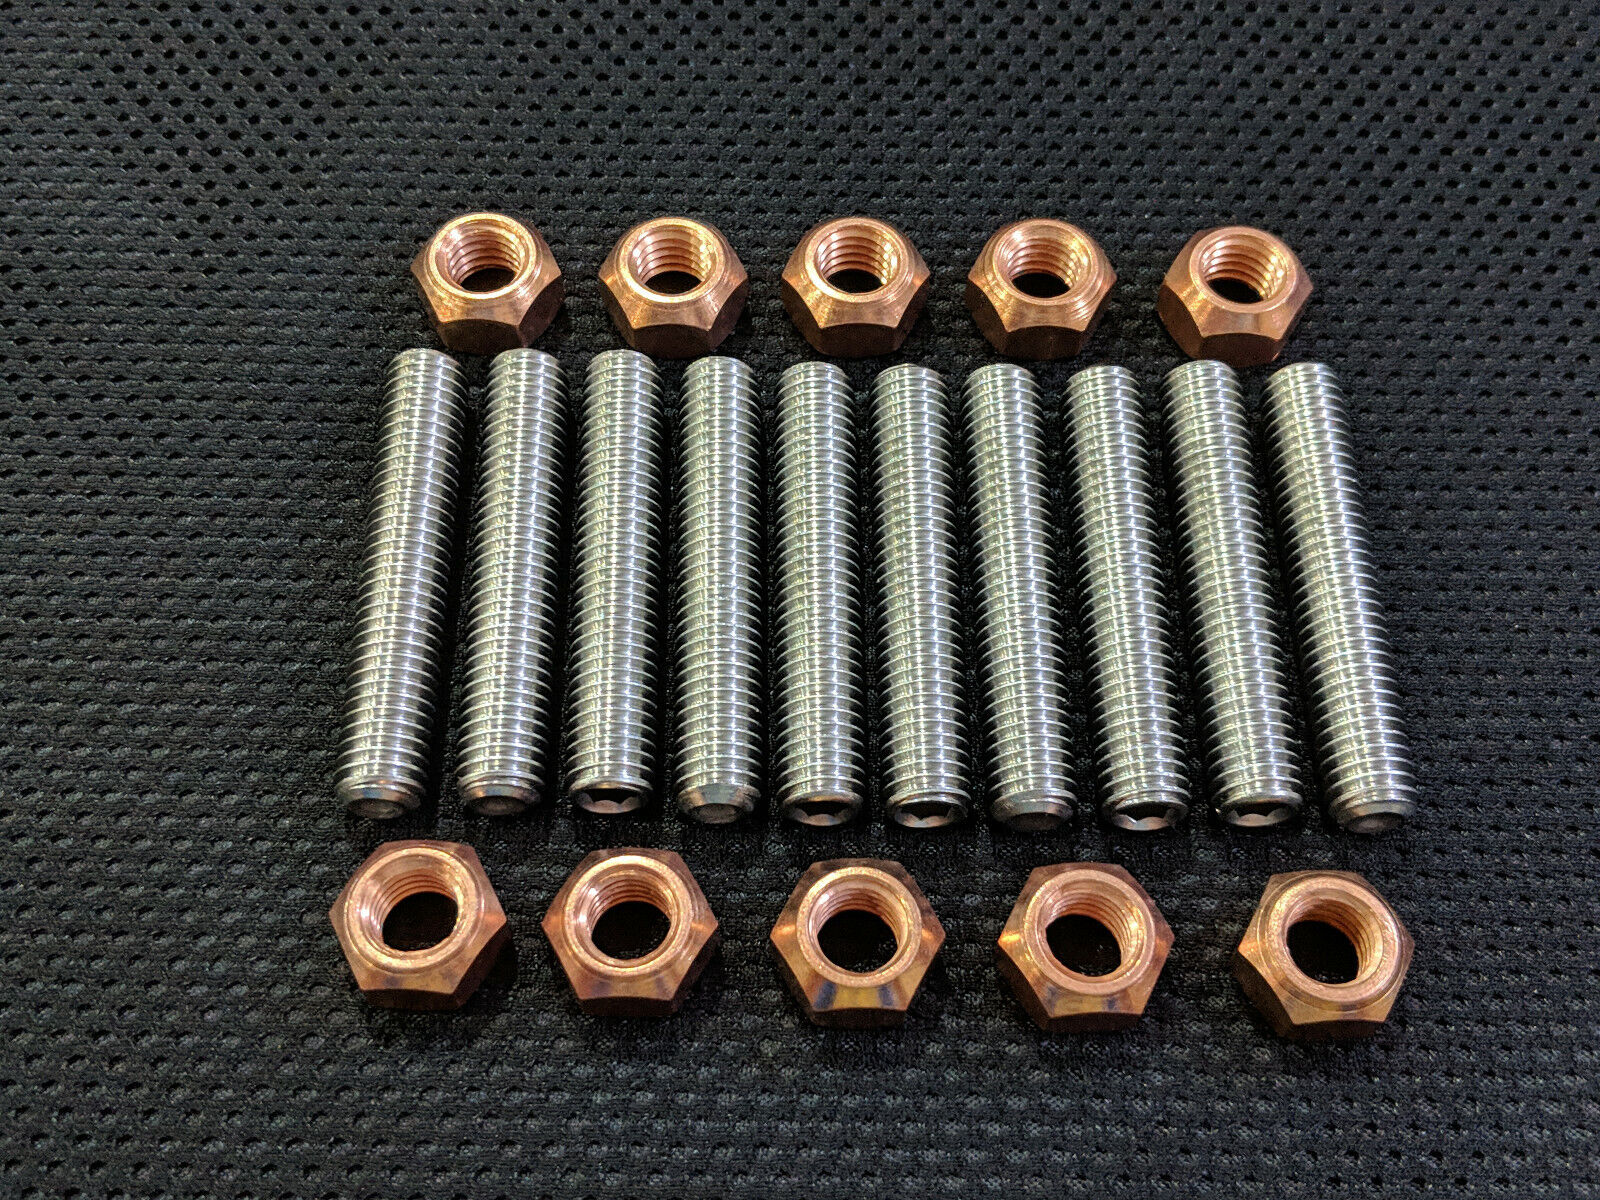 VW Golf VR6 Exhaust Manifold Stainless Steel Studs & Copper Exhaust Nuts 